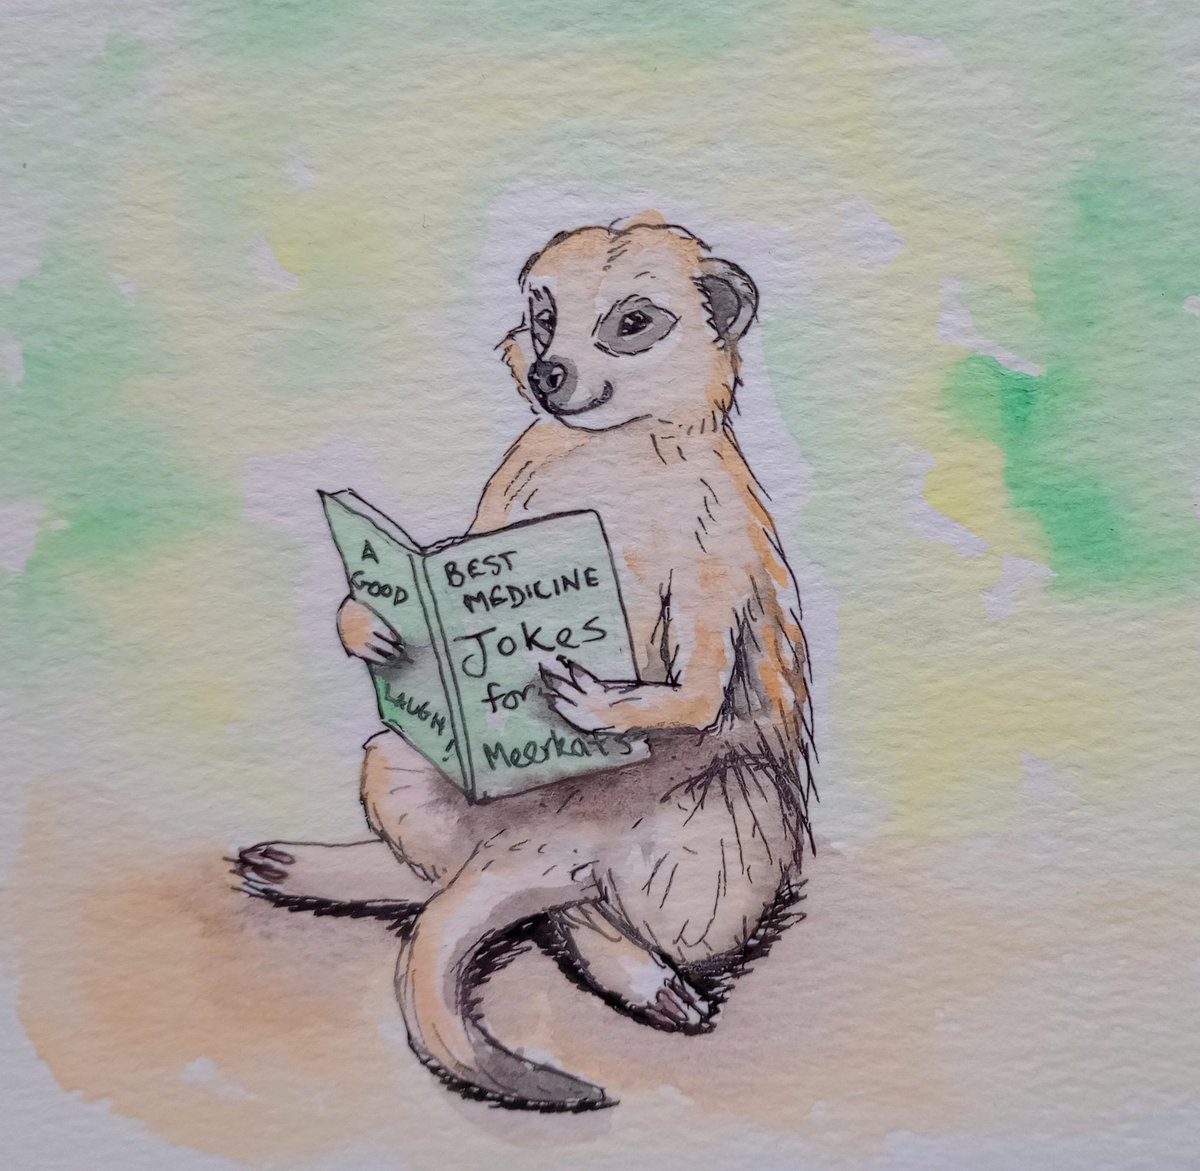 Happy #AnimalAlphabets Monday! This week's word is Medicine so here is my Meerkat hoping that laughter is the best form. 😁 Hope you have a great week! ☺️💕 @AnimalAlphabets #medicine #meerkat #jokebook #laughteristhebestmedicine #laugh